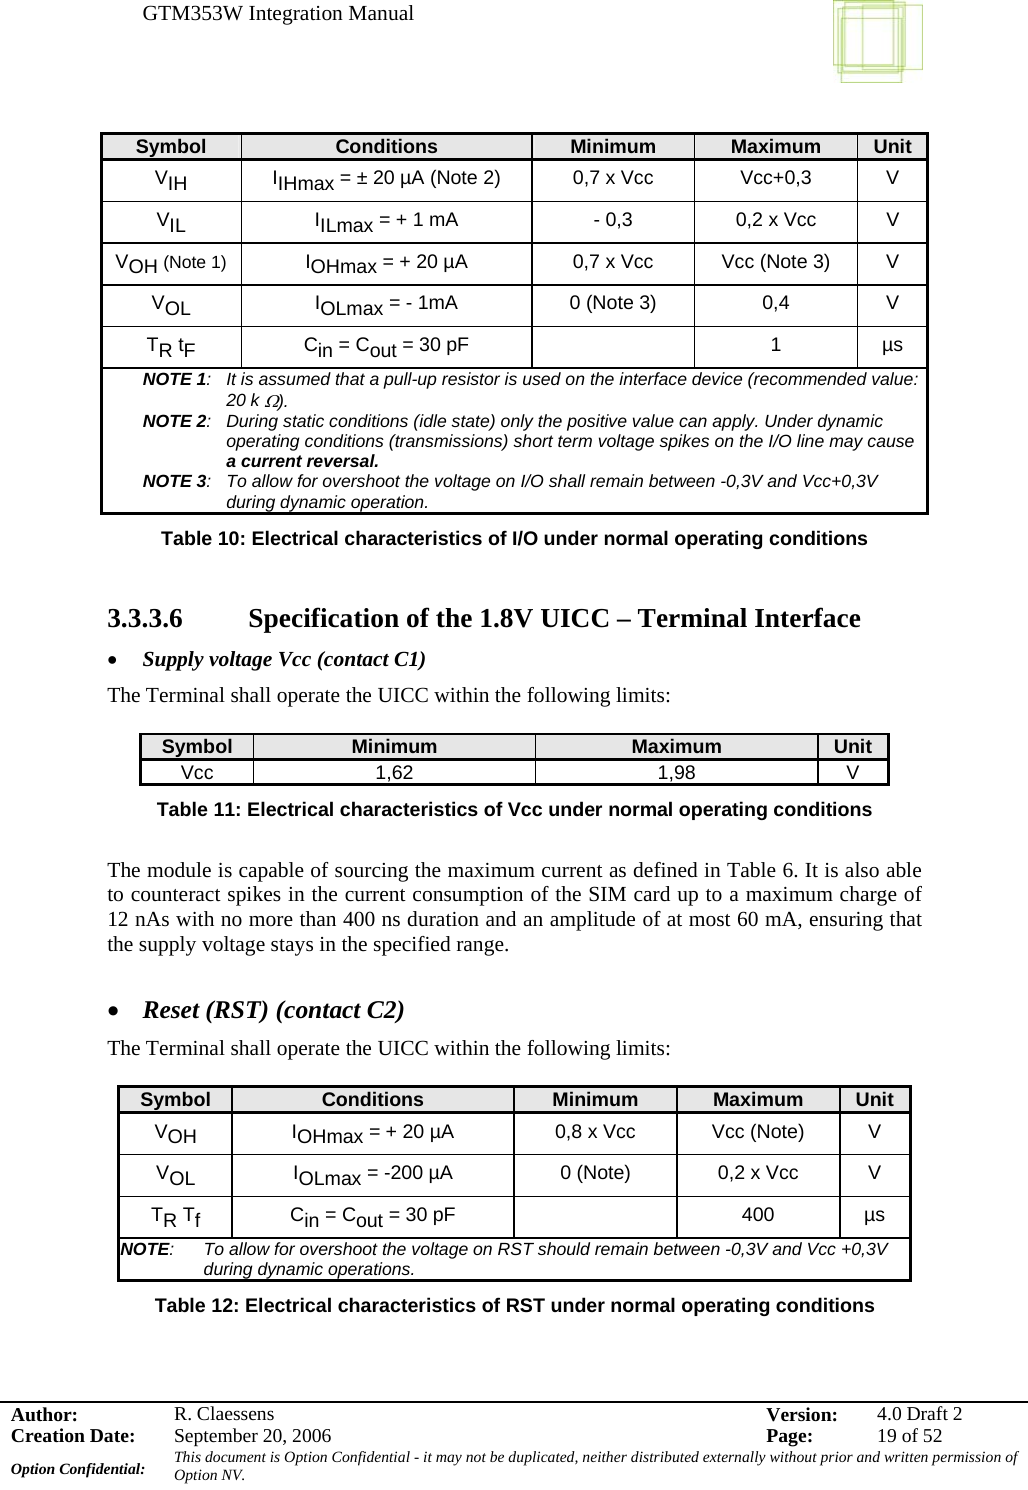 GTM353W Integration Manual      Author: R. Claessens  Version:  4.0 Draft 2Creation Date:  September 20, 2006  Page:  19 of 52 Option Confidential:  This document is Option Confidential - it may not be duplicated, neither distributed externally without prior and written permission of Option NV.    Symbol  Conditions  Minimum  Maximum  Unit VIH IIHmax = ± 20 µA (Note 2)  0,7 x Vcc  Vcc+0,3   V VIL IILmax = + 1 mA   - 0,3  0,2 x Vcc  V VOH (Note 1) IOHmax = + 20 µA  0,7 x Vcc  Vcc (Note 3)  V VOL IOLmax = - 1mA  0 (Note 3)  0,4  V TR tF Cin = Cout = 30 pF    1  µs NOTE 1:  It is assumed that a pull-up resistor is used on the interface device (recommended value: 20 k Ω). NOTE 2:  During static conditions (idle state) only the positive value can apply. Under dynamic operating conditions (transmissions) short term voltage spikes on the I/O line may cause a current reversal. NOTE 3:  To allow for overshoot the voltage on I/O shall remain between -0,3V and Vcc+0,3V during dynamic operation. Table 10: Electrical characteristics of I/O under normal operating conditions  3.3.3.6   Specification of the 1.8V UICC – Terminal Interface • Supply voltage Vcc (contact C1) The Terminal shall operate the UICC within the following limits:  Symbol  Minimum  Maximum  Unit Vcc 1,62  1,98  V Table 11: Electrical characteristics of Vcc under normal operating conditions  The module is capable of sourcing the maximum current as defined in Table 6. It is also able to counteract spikes in the current consumption of the SIM card up to a maximum charge of 12 nAs with no more than 400 ns duration and an amplitude of at most 60 mA, ensuring that the supply voltage stays in the specified range.  • Reset (RST) (contact C2) The Terminal shall operate the UICC within the following limits:  Symbol  Conditions  Minimum  Maximum  Unit VOH IOHmax = + 20 µA  0,8 x Vcc  Vcc (Note)  V VOL IOLmax = -200 µA   0 (Note)  0,2 x Vcc  V TR Tf Cin = Cout = 30 pF    400  µs NOTE:  To allow for overshoot the voltage on RST should remain between -0,3V and Vcc +0,3V during dynamic operations. Table 12: Electrical characteristics of RST under normal operating conditions  